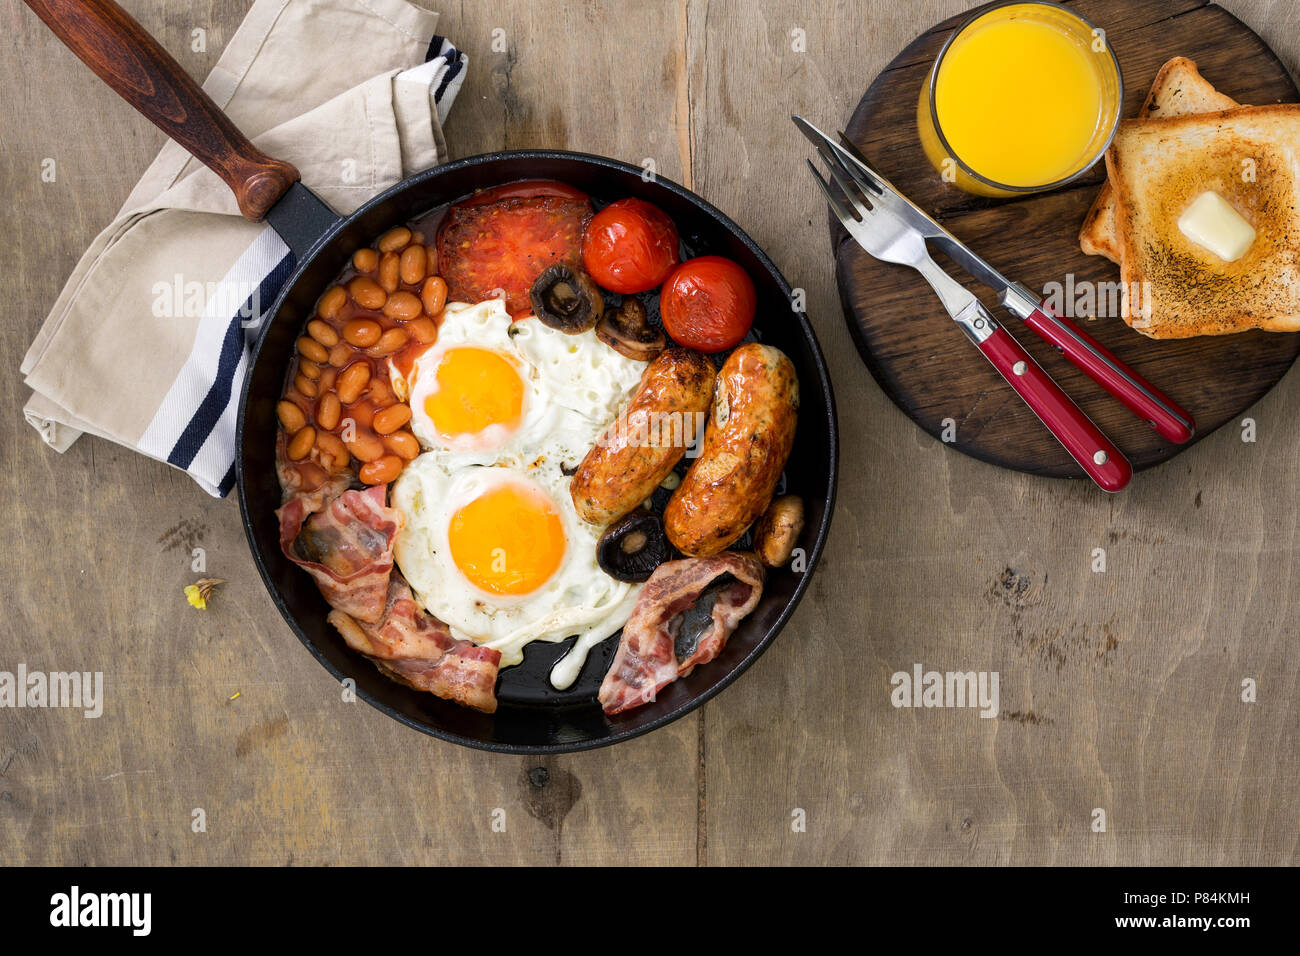 https://c8.alamy.com/comp/P84KMH/full-english-breakfast-in-a-cast-iron-frying-pan-on-a-wooden-light-table-top-view-P84KMH.jpg